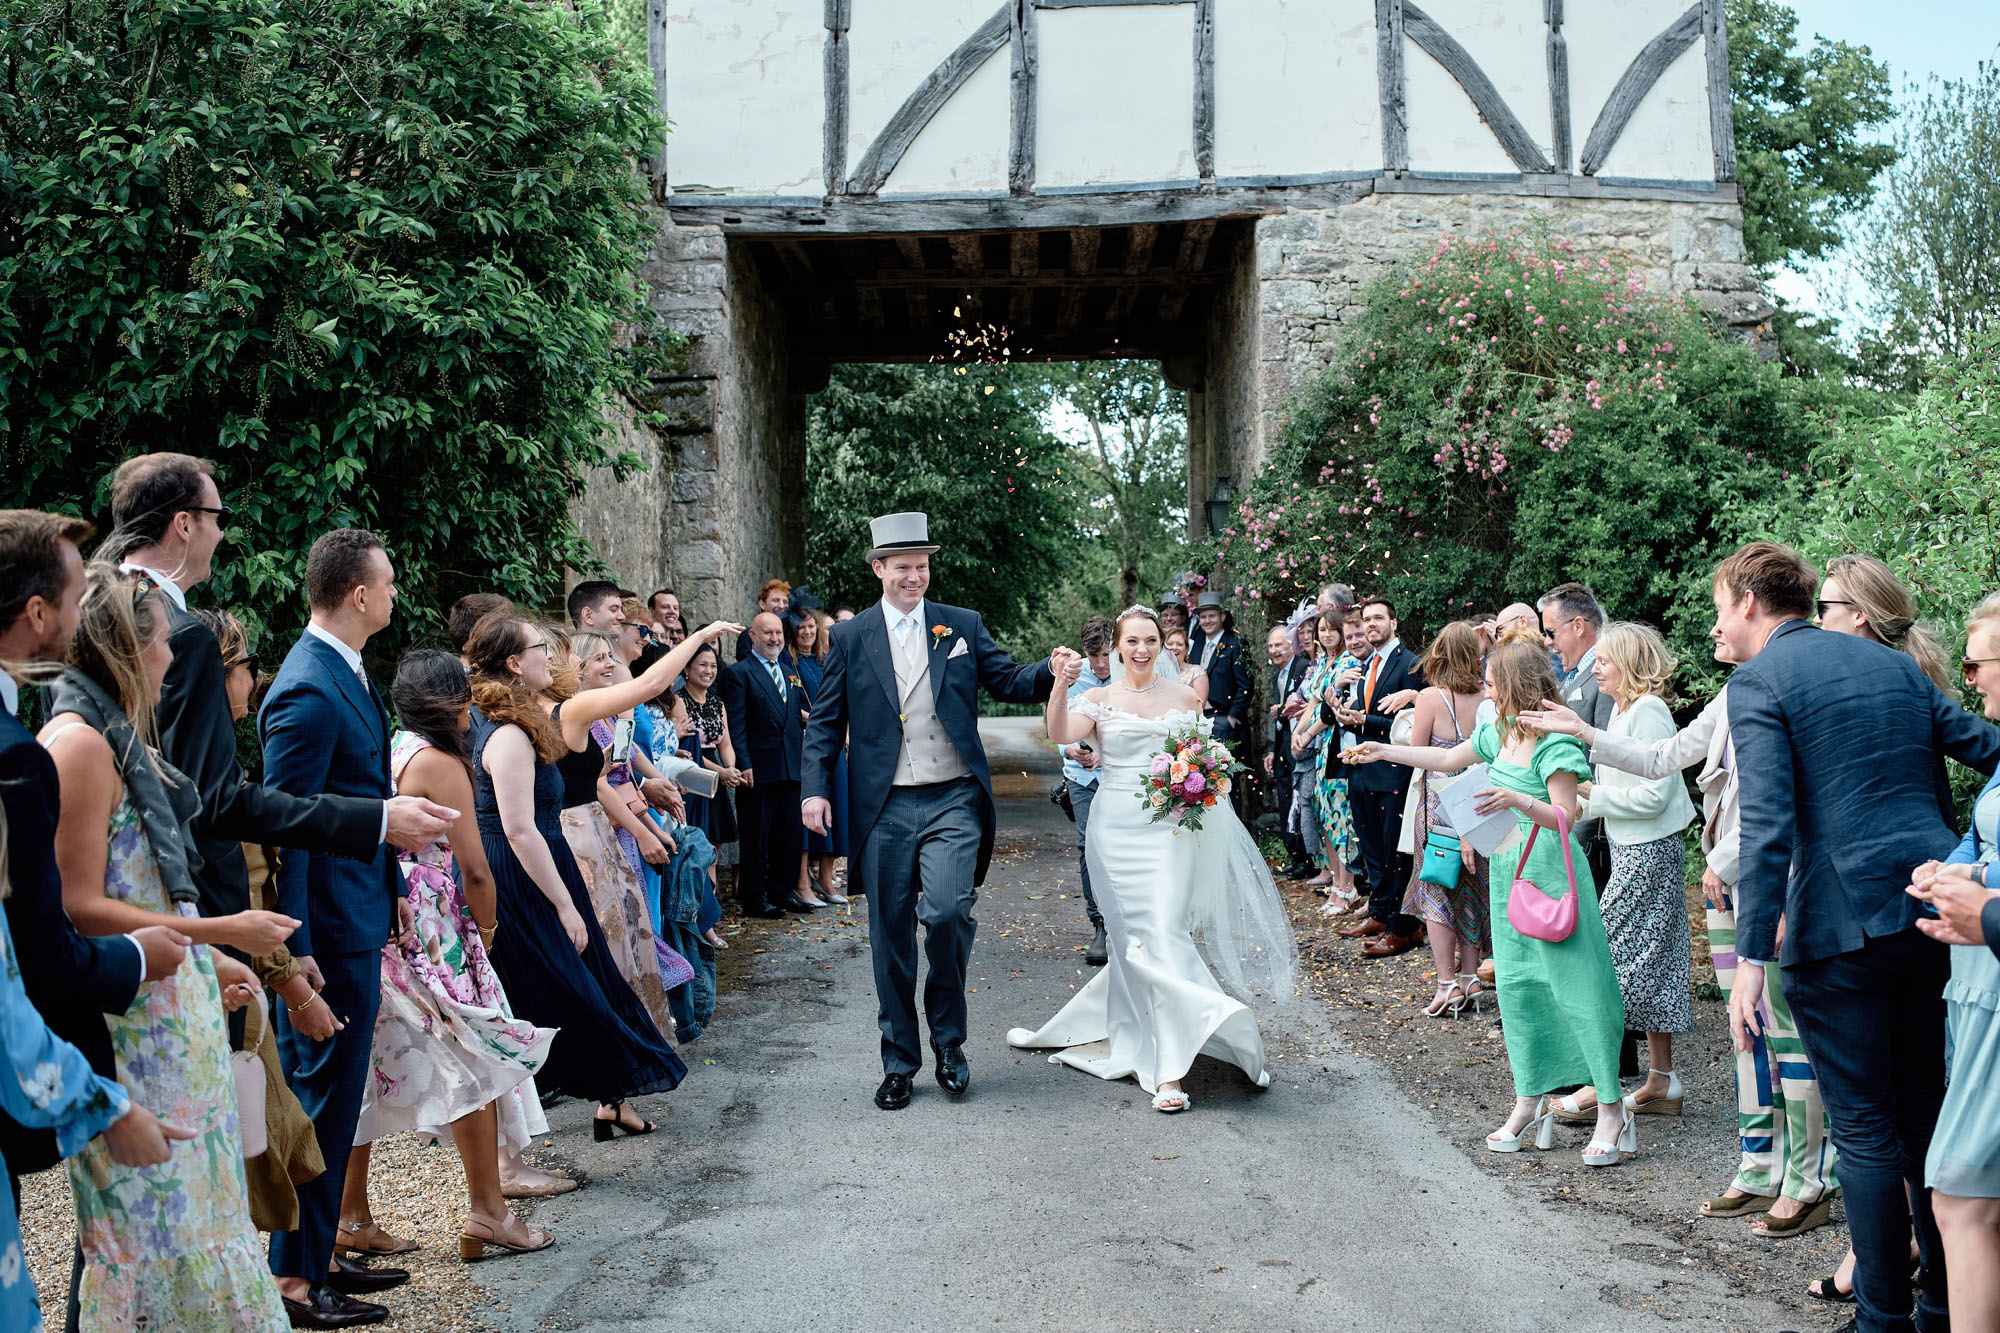 Newlyweds walking between their guests as confetti is thrown. By Howling Basset Photography